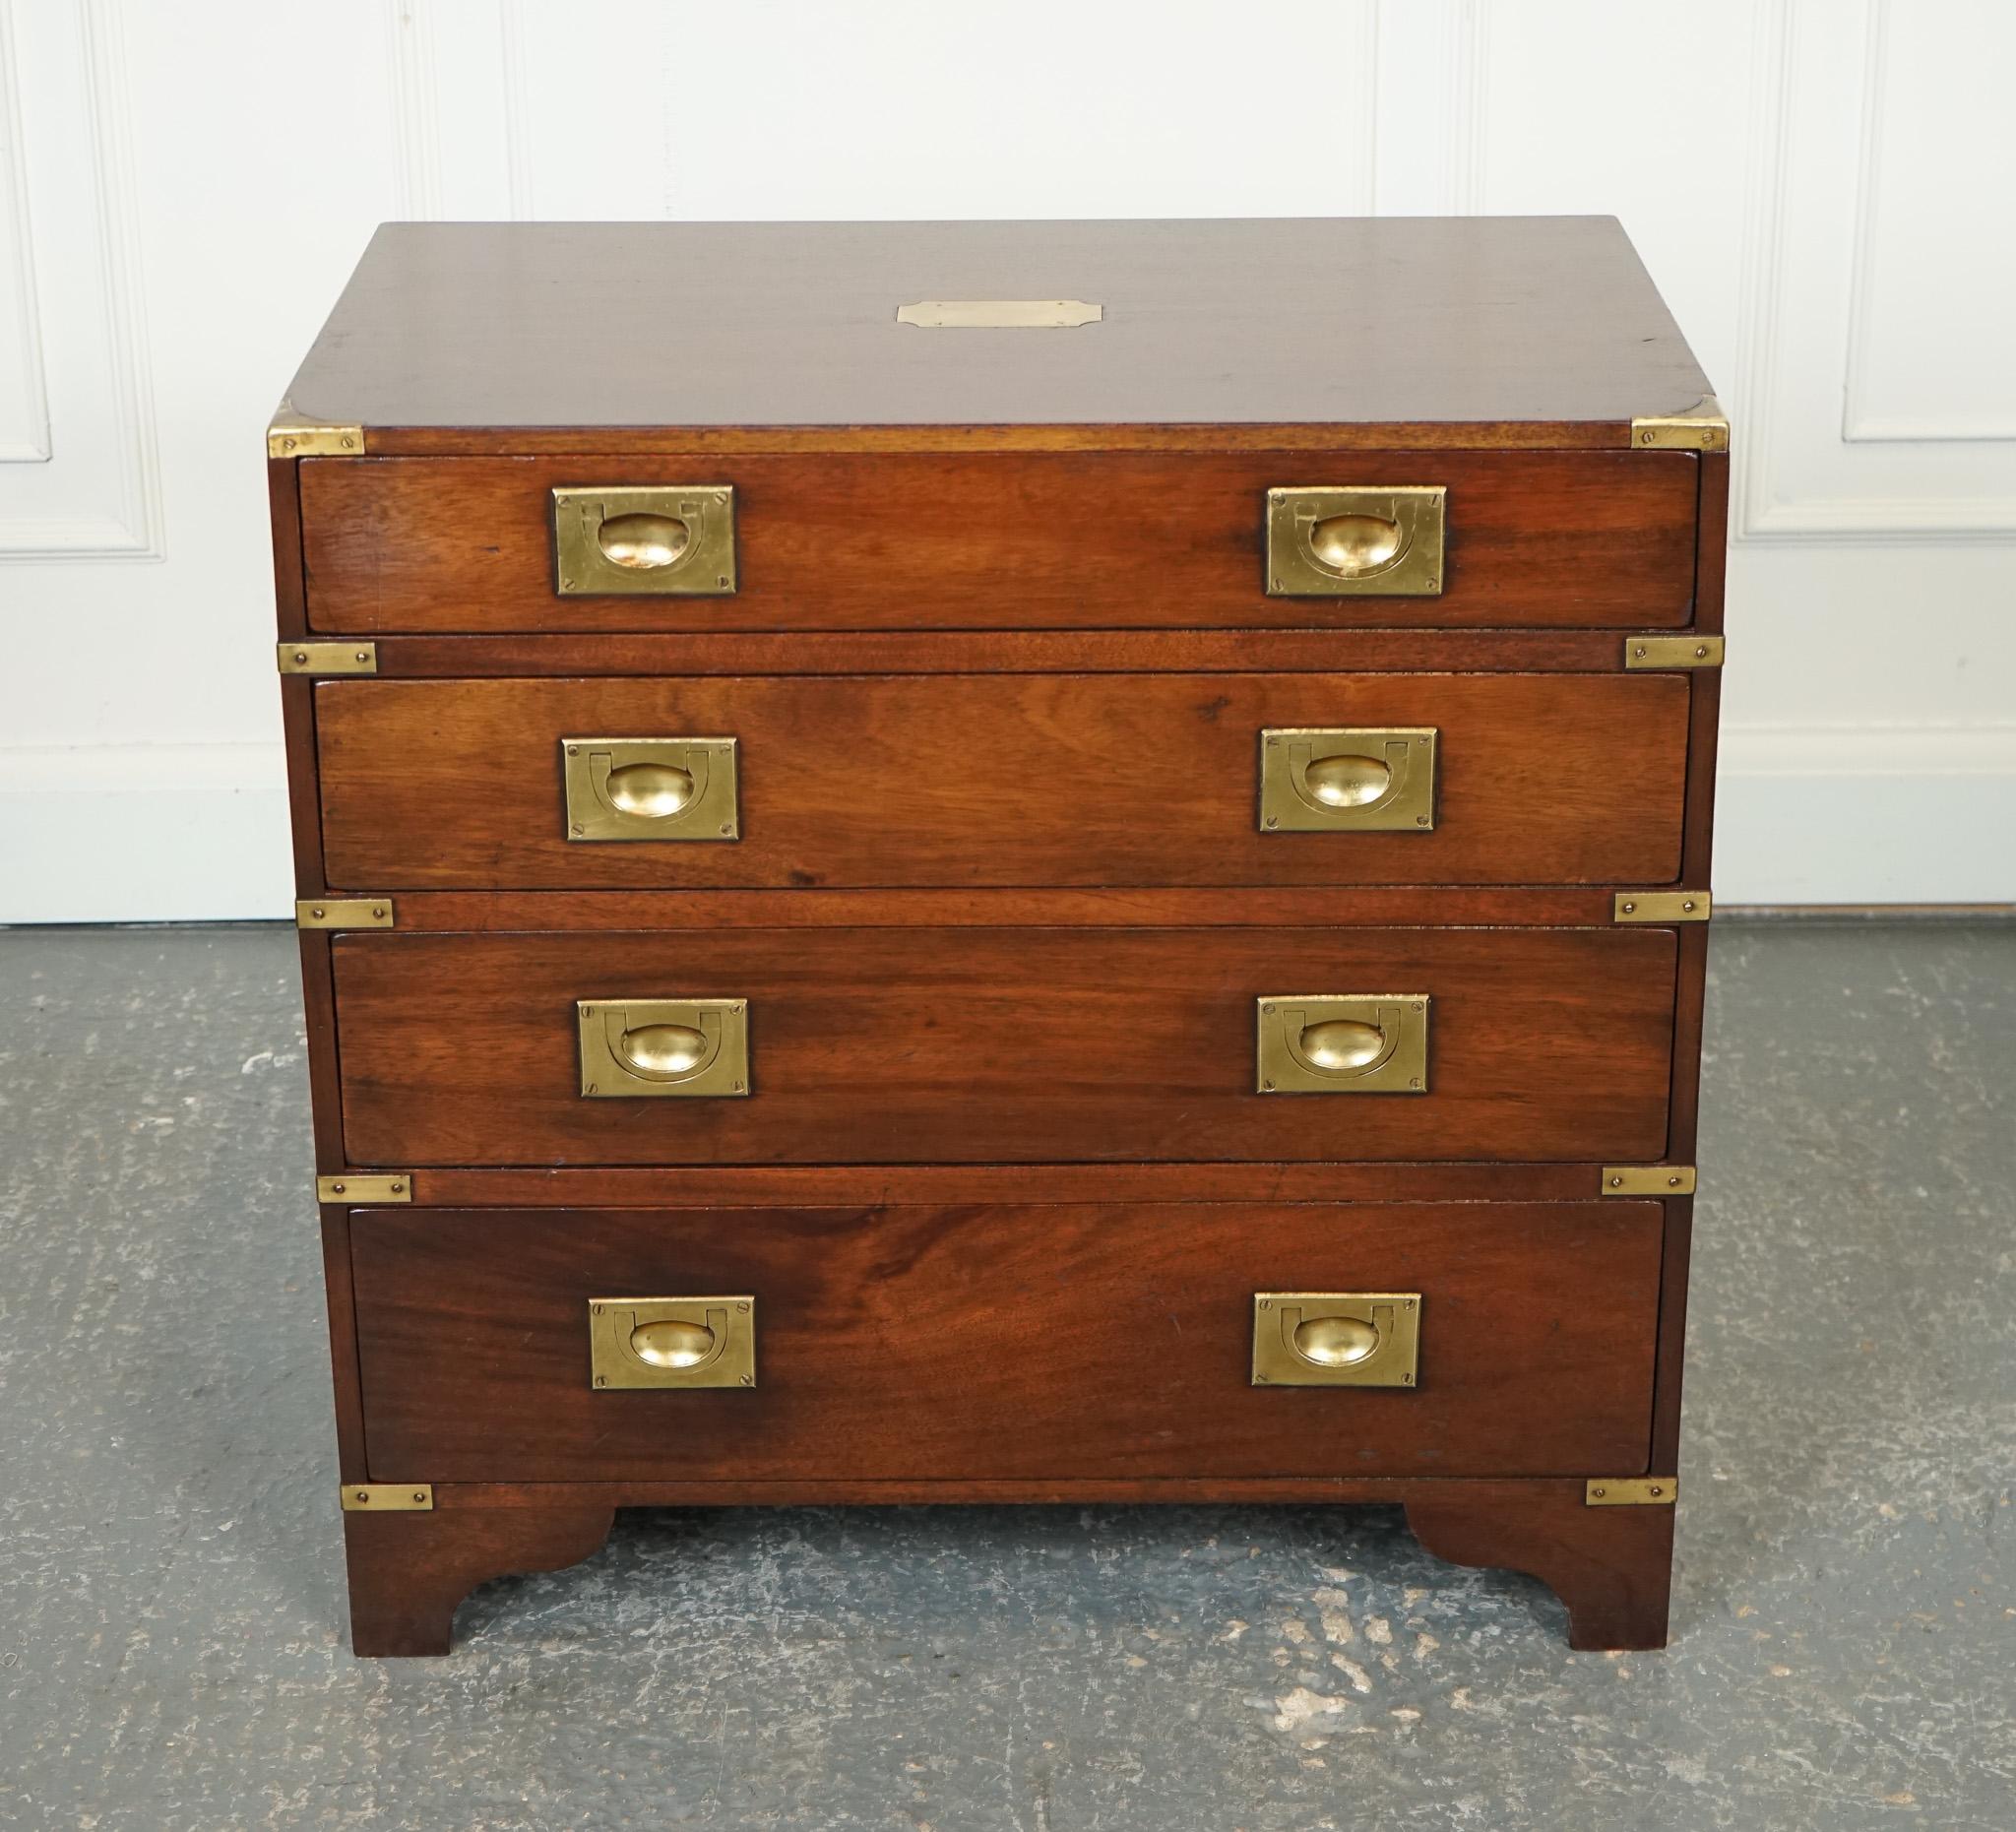 British STUNNING HARRODS KENNEDY MILITARY CAMPAIGN CHEST OF DRAWERS WiTH BRASS HANDLES